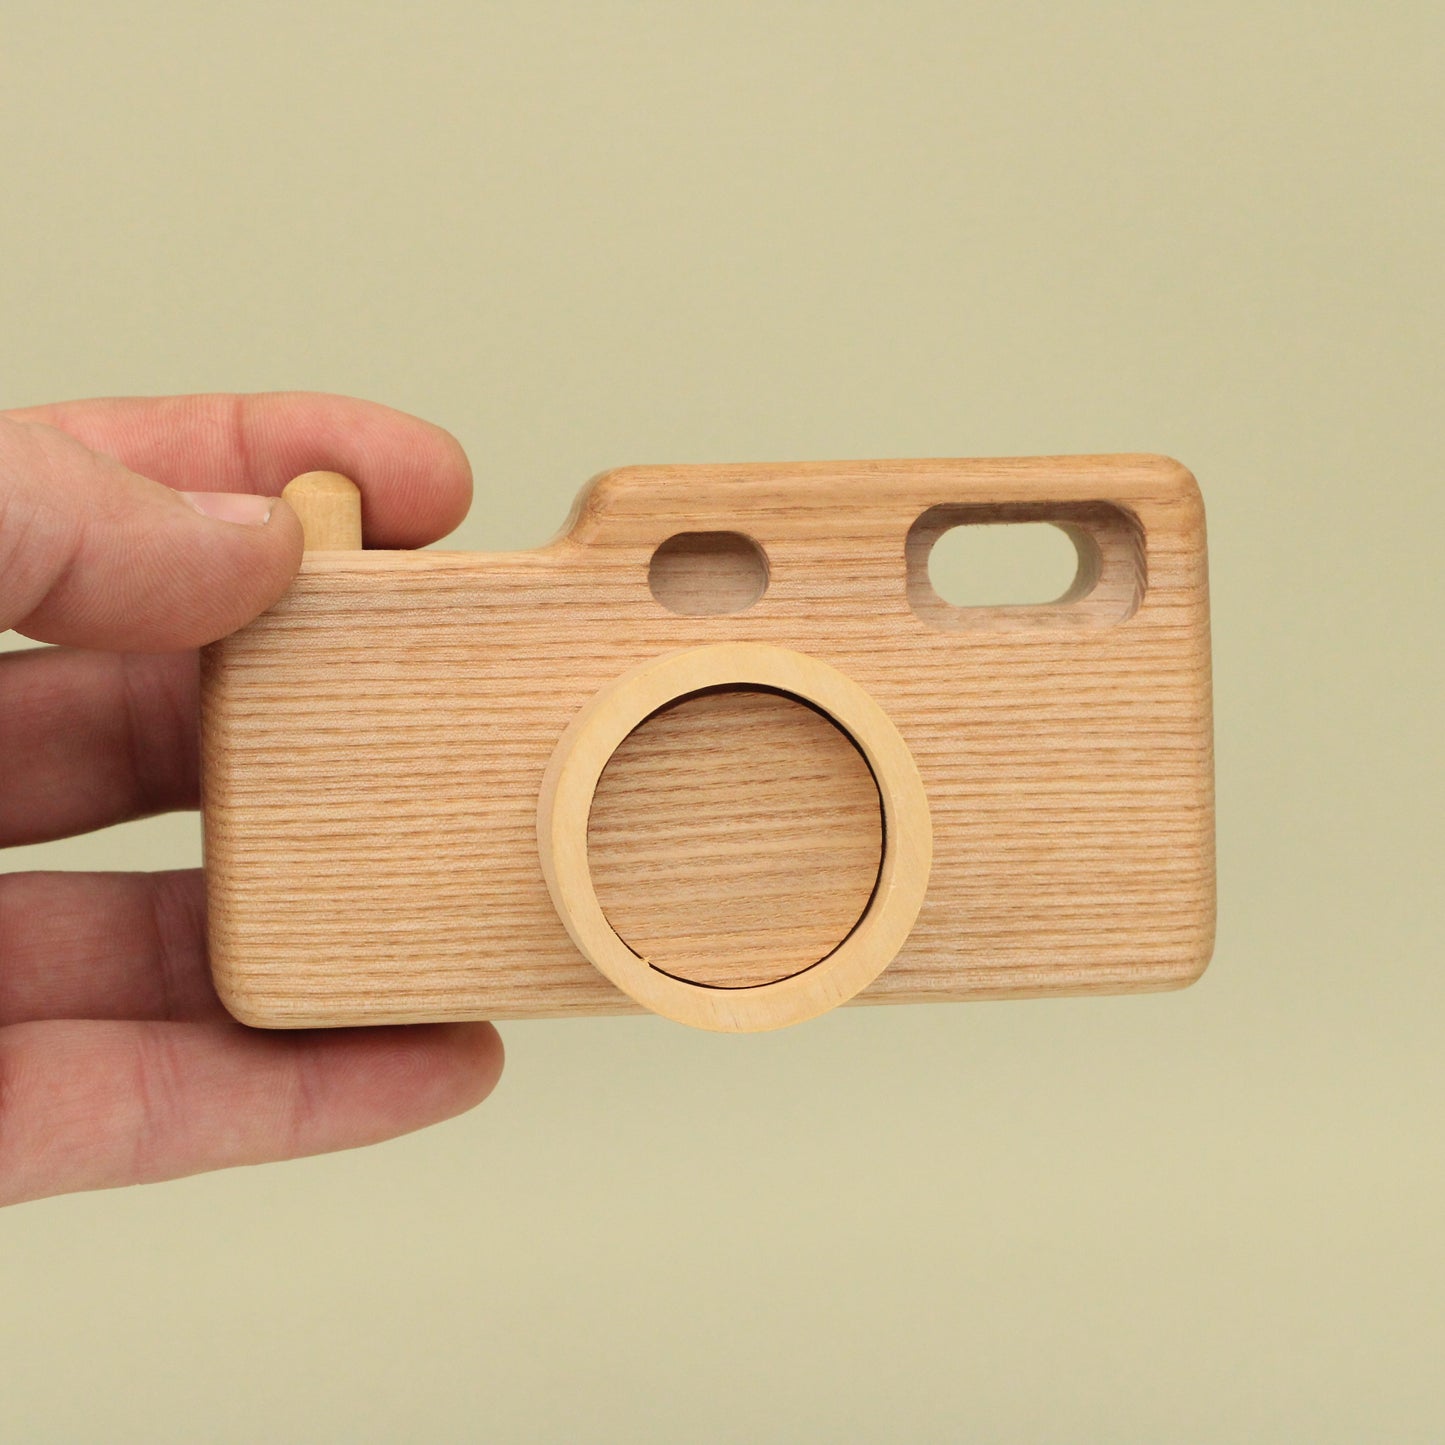 Lotes Toys Wooden Camera II